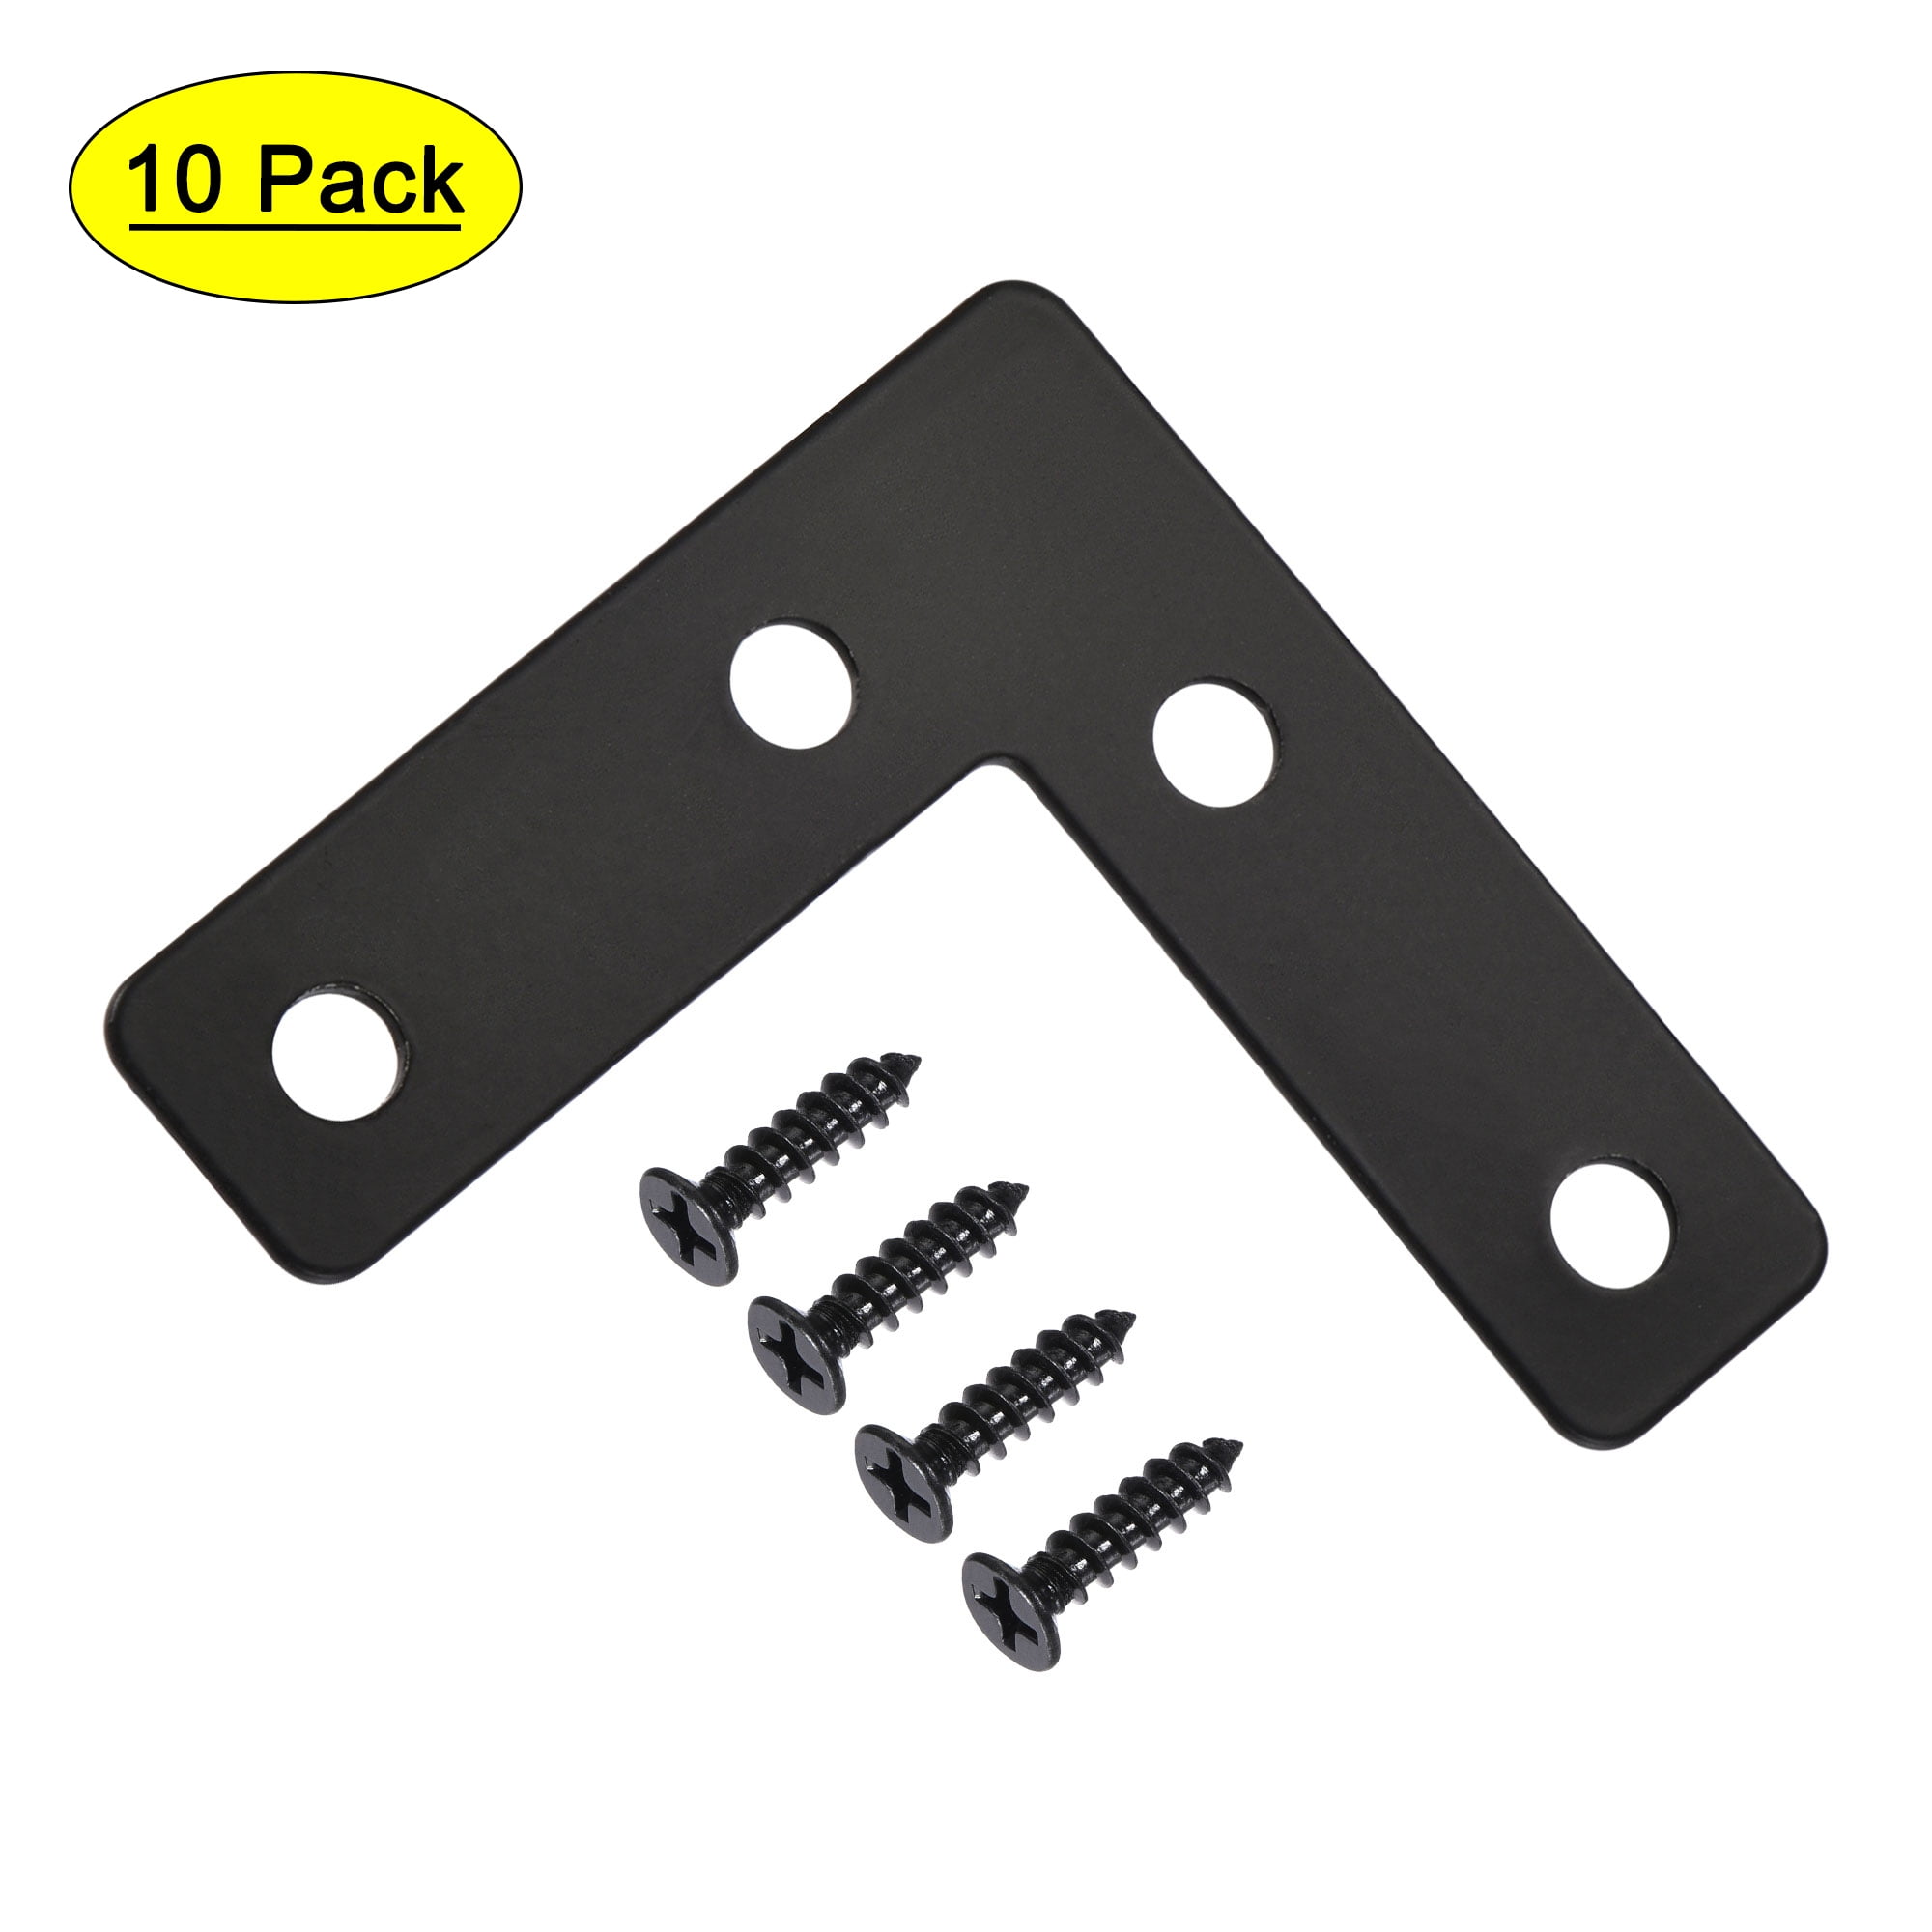 PACK OF 4 FOAM PICTURE CORNER PROTECTORS 'A' SUITABLE FOR 10mm 24mm MOULDINGS 